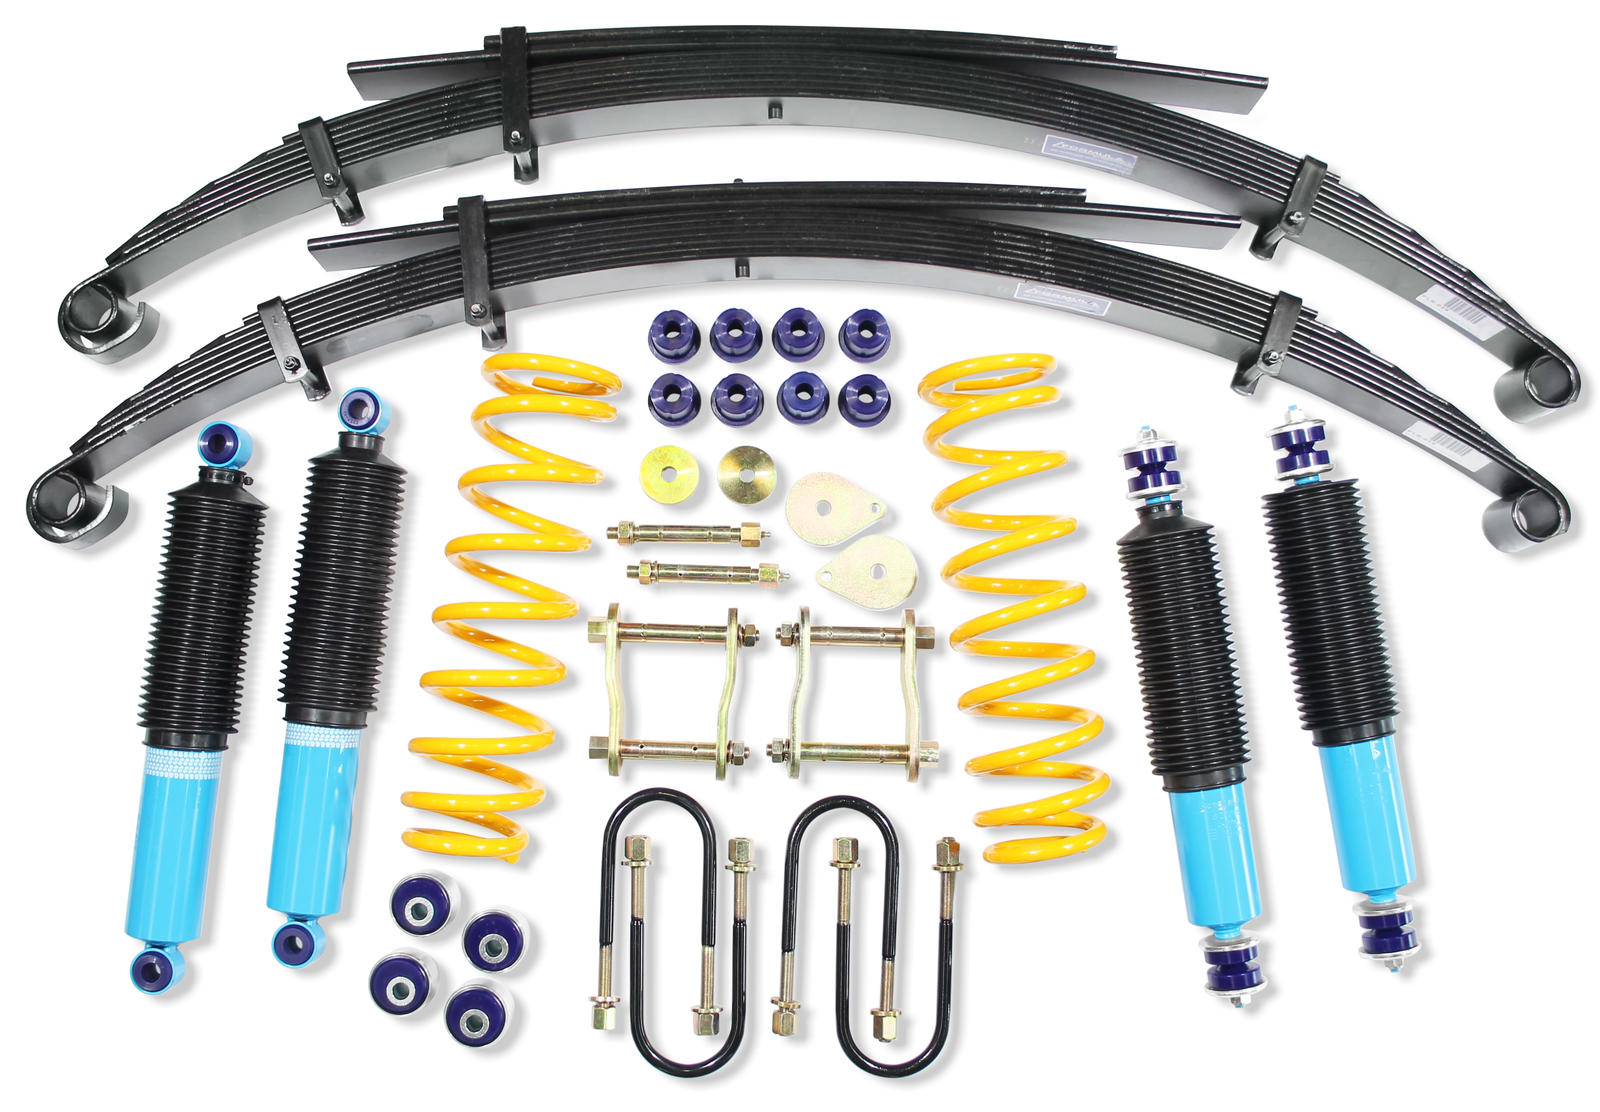 2 Inch 50mm Formula 4x4 Big Bore Lift Kit to suit Toyota Landcruiser 76 Series 2007-on